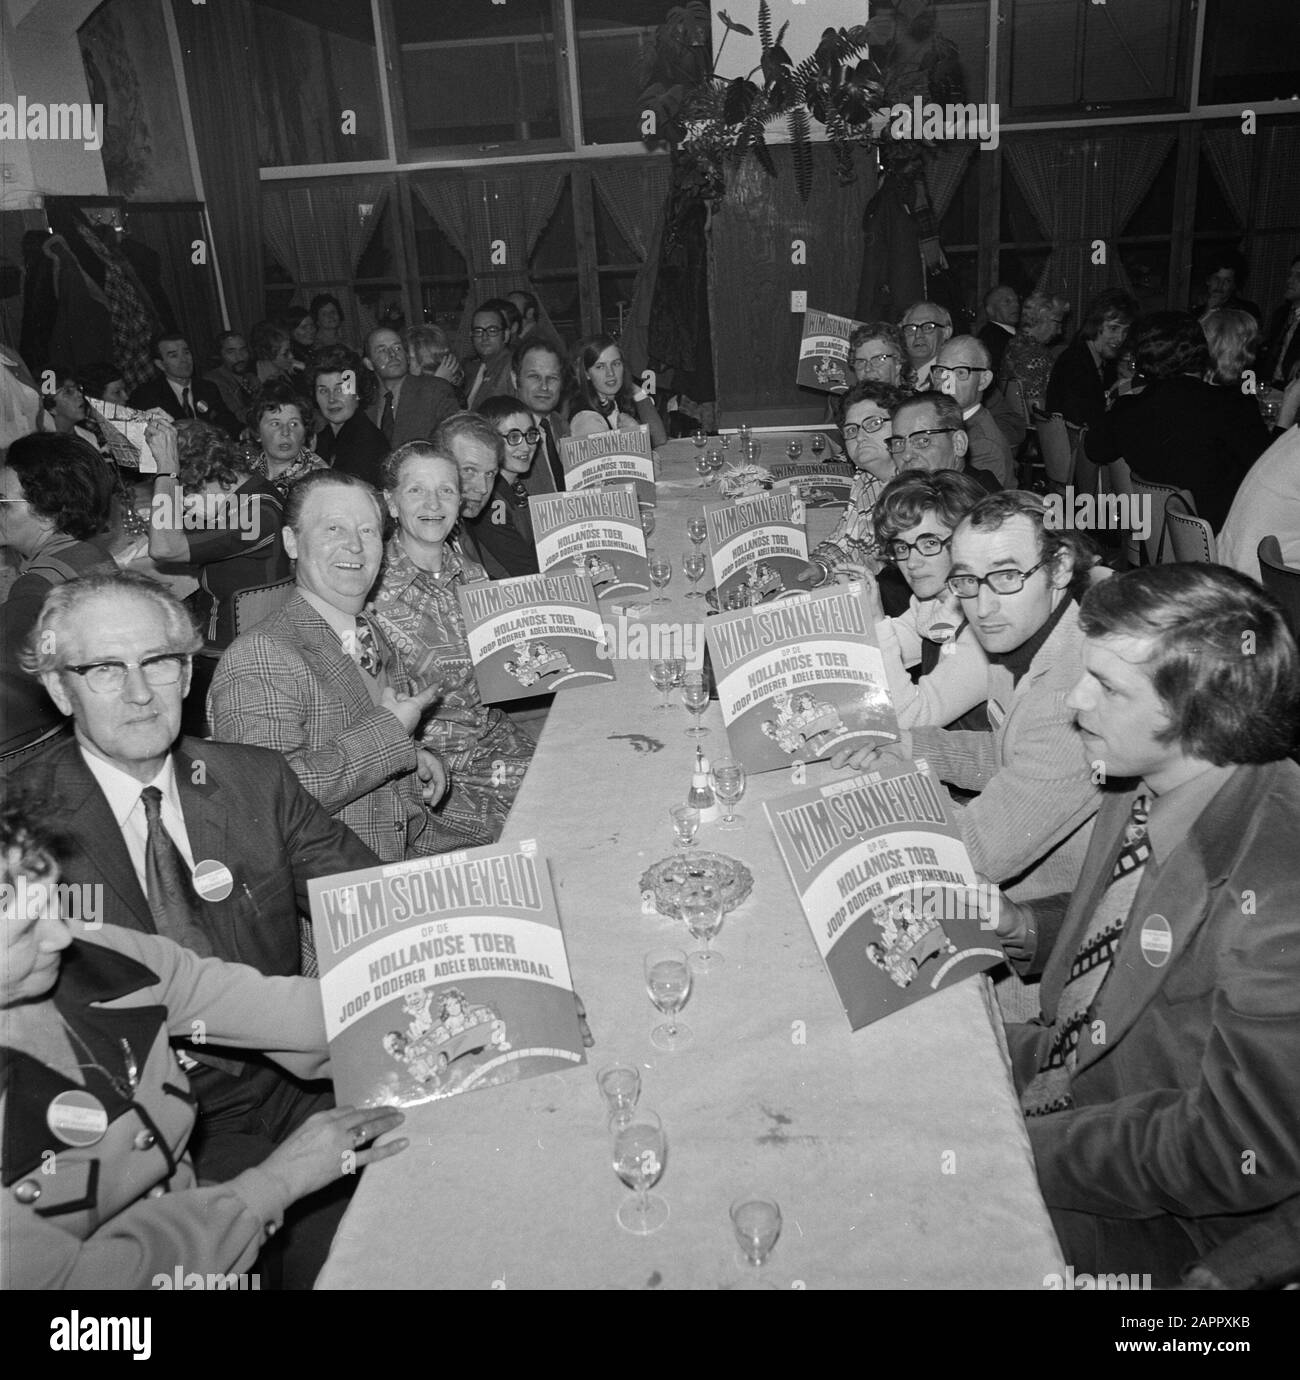 The album with material from the film On the Dutch tour  Group of people at the table with the gramophone record Date: 19 December 1973 Location: Noord-Holland, Volendam Keywords: films, gramophone records, soundtracks Settings name: Newsblad van het Noorden Stock Photo